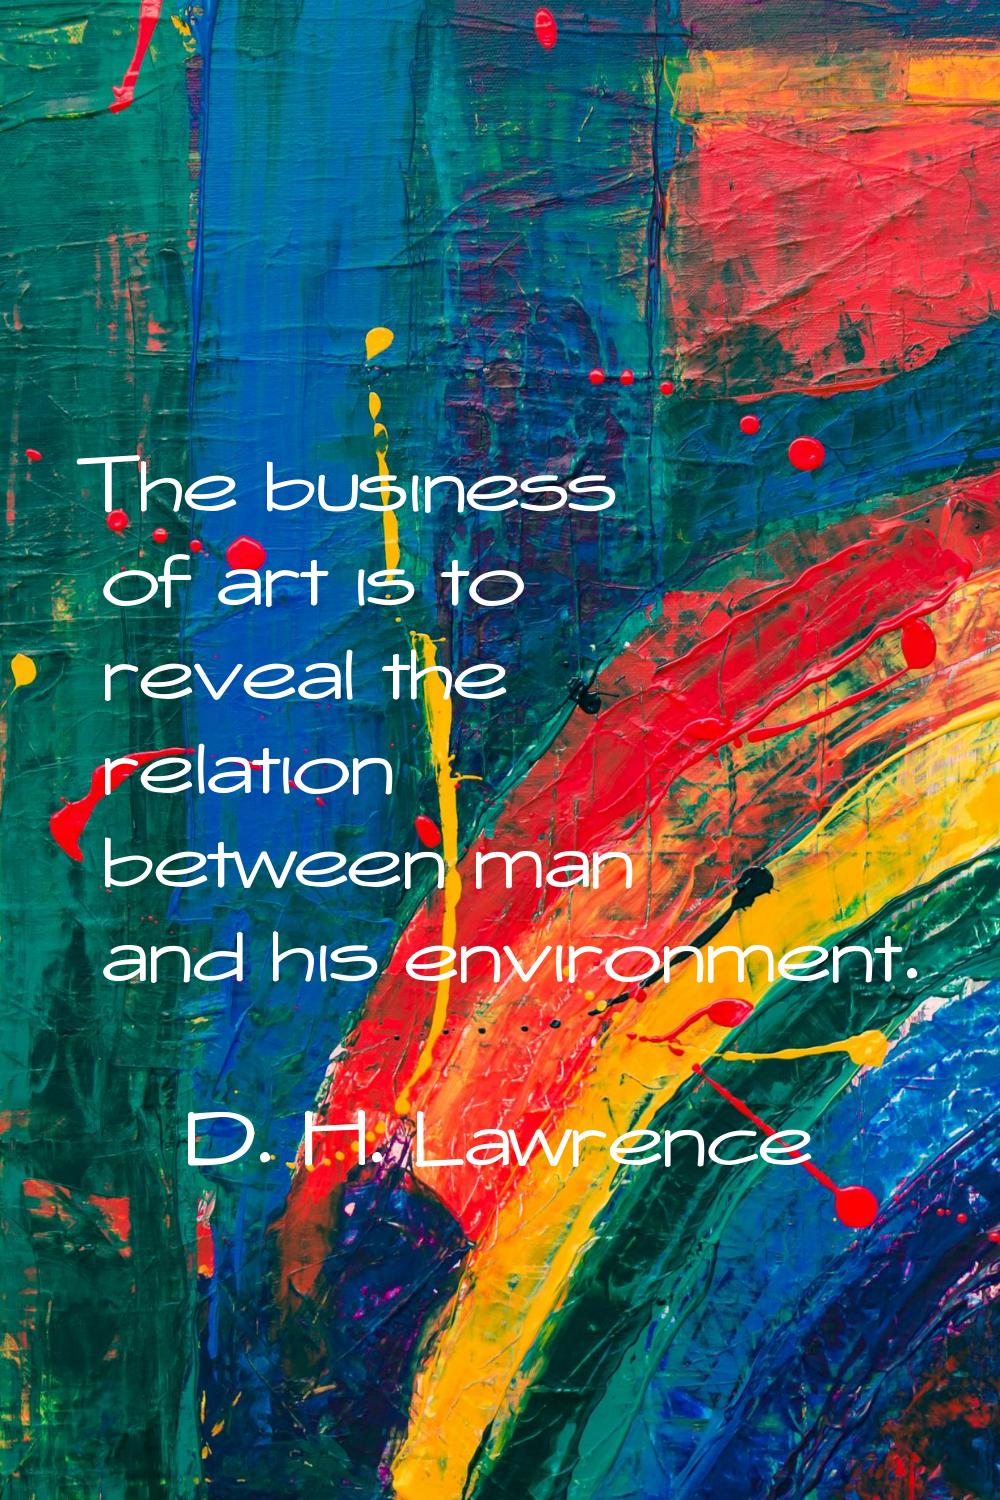 The business of art is to reveal the relation between man and his environment.